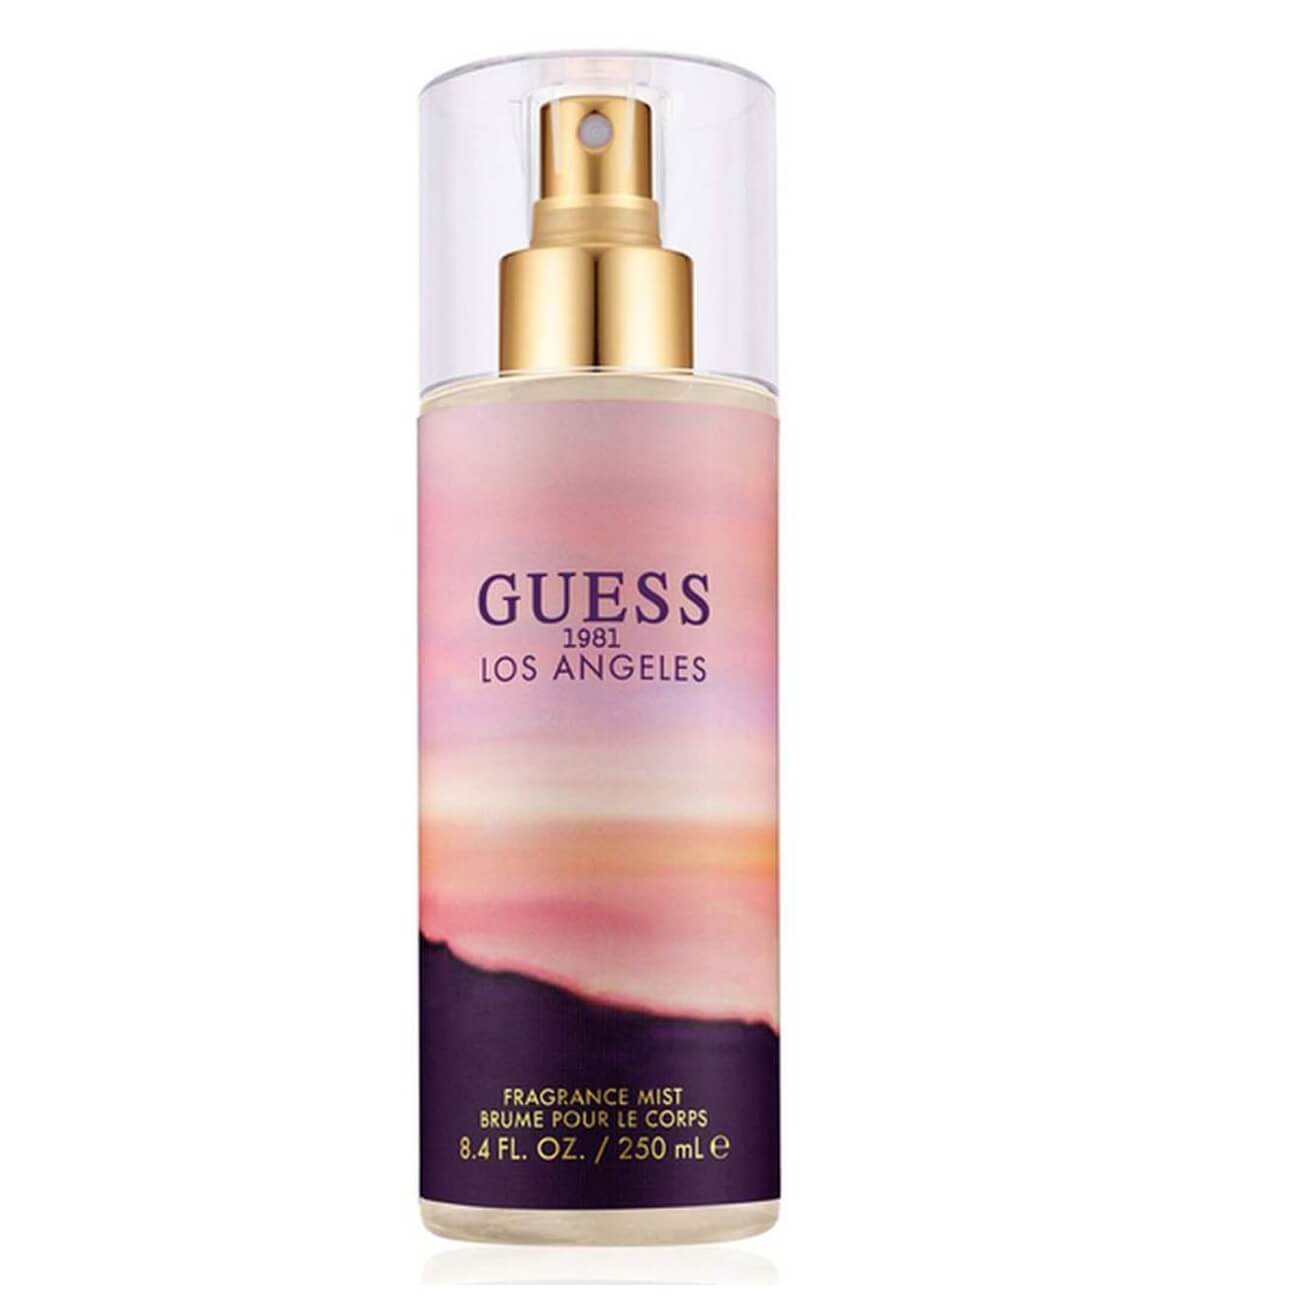 guess los angeles body mist